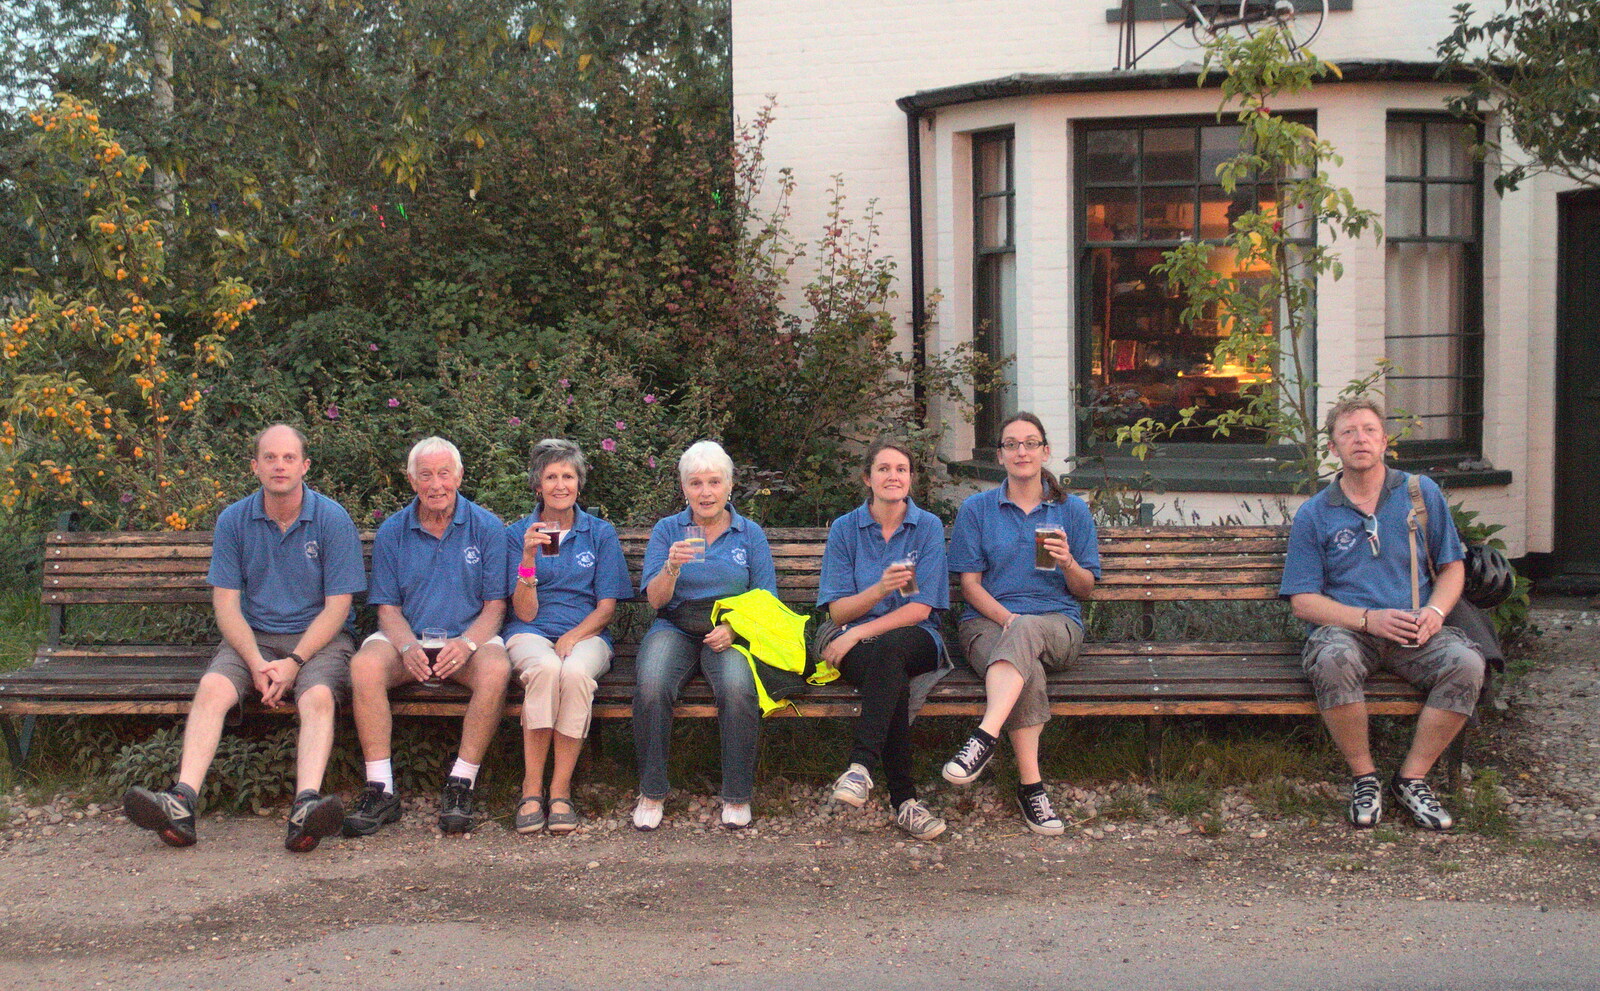 The BSCC on the world's longest bench at Mellis from Bike Rides and the BSCC at the Railway, Mellis and Brome, Suffolk - 18th September 2014